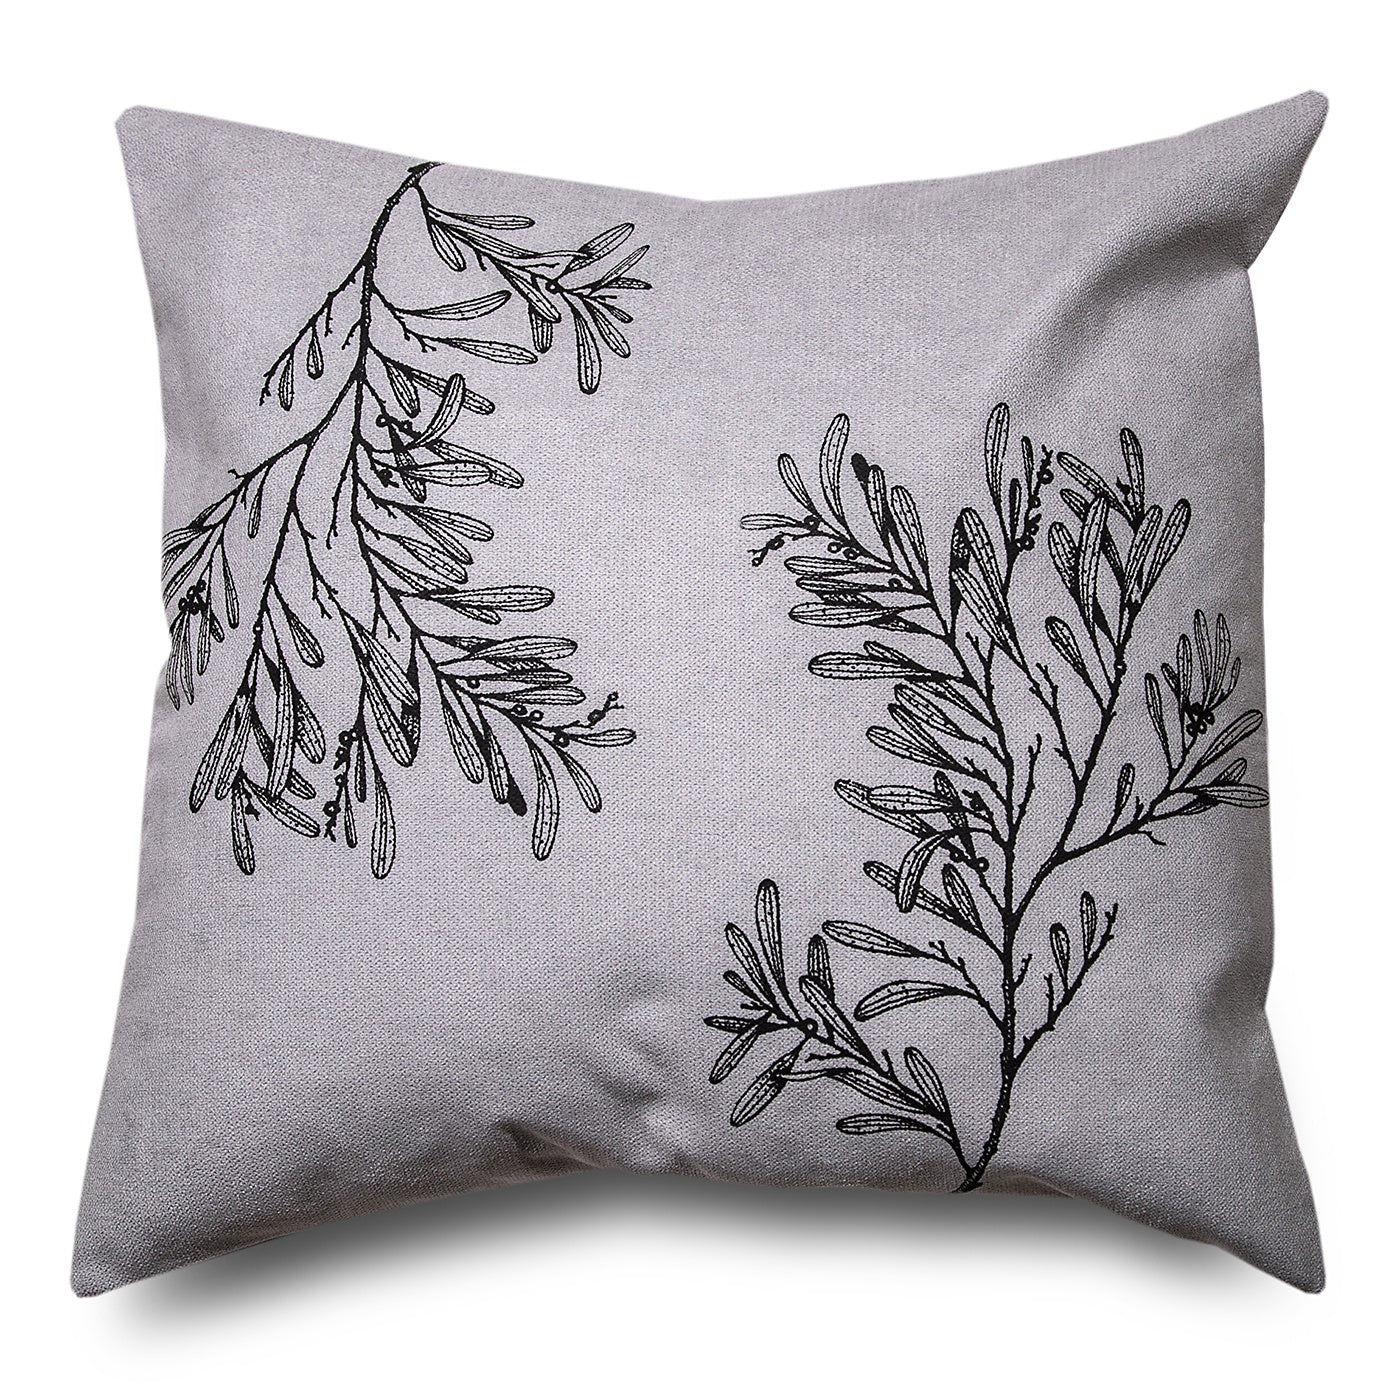 Stalley Textile Co. - Cushion Cover - Blackwood - Black on Light Grey